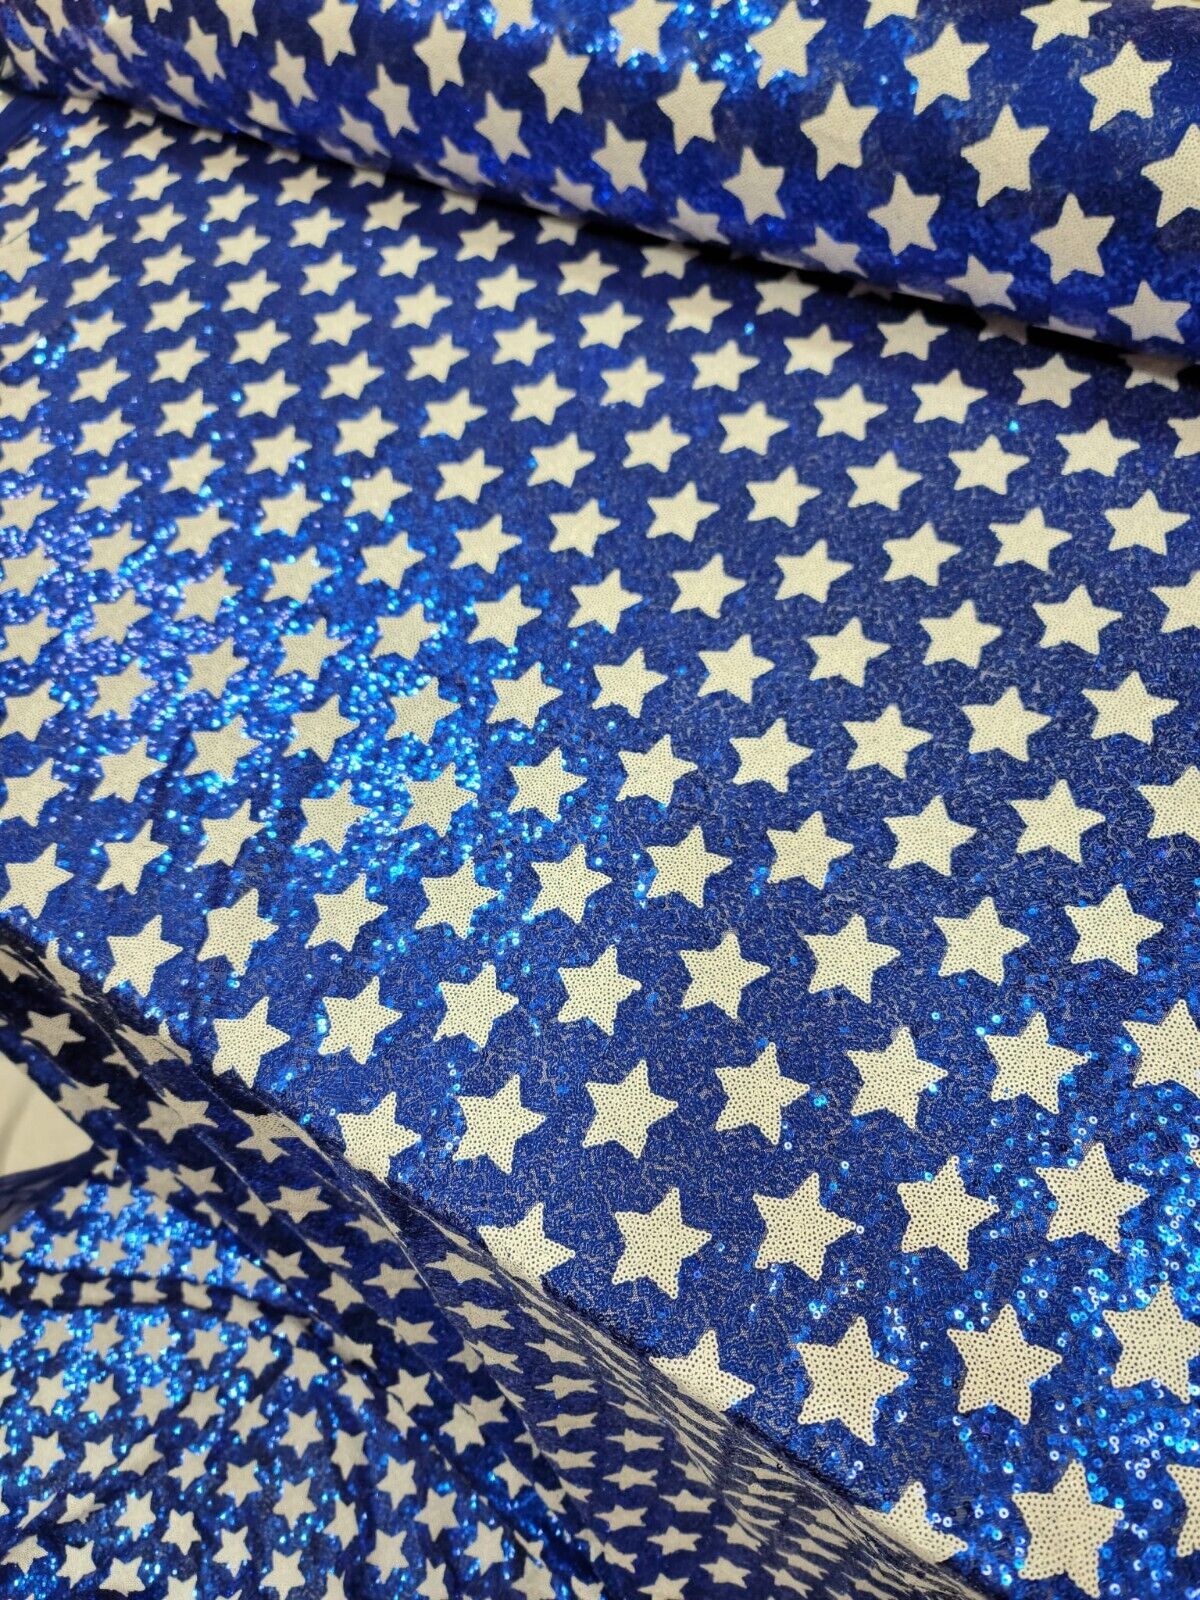 White Stars Sequin Royal Blue Background Fabric By The Yard Four W Stretch Mesh